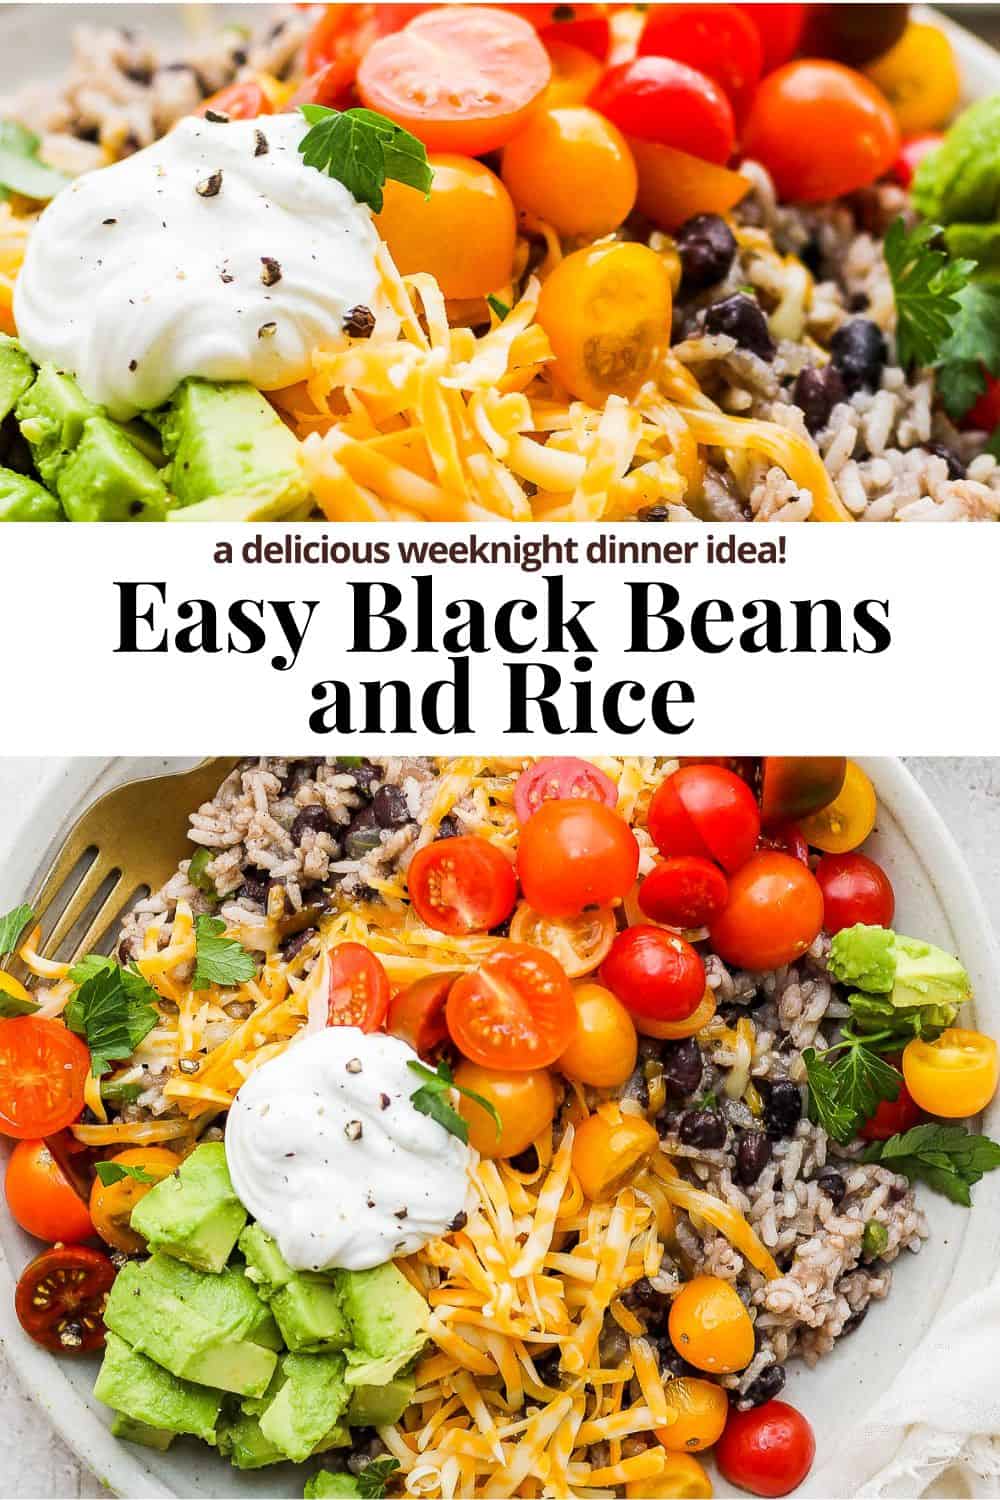 Pinterest image for black beans and rice.